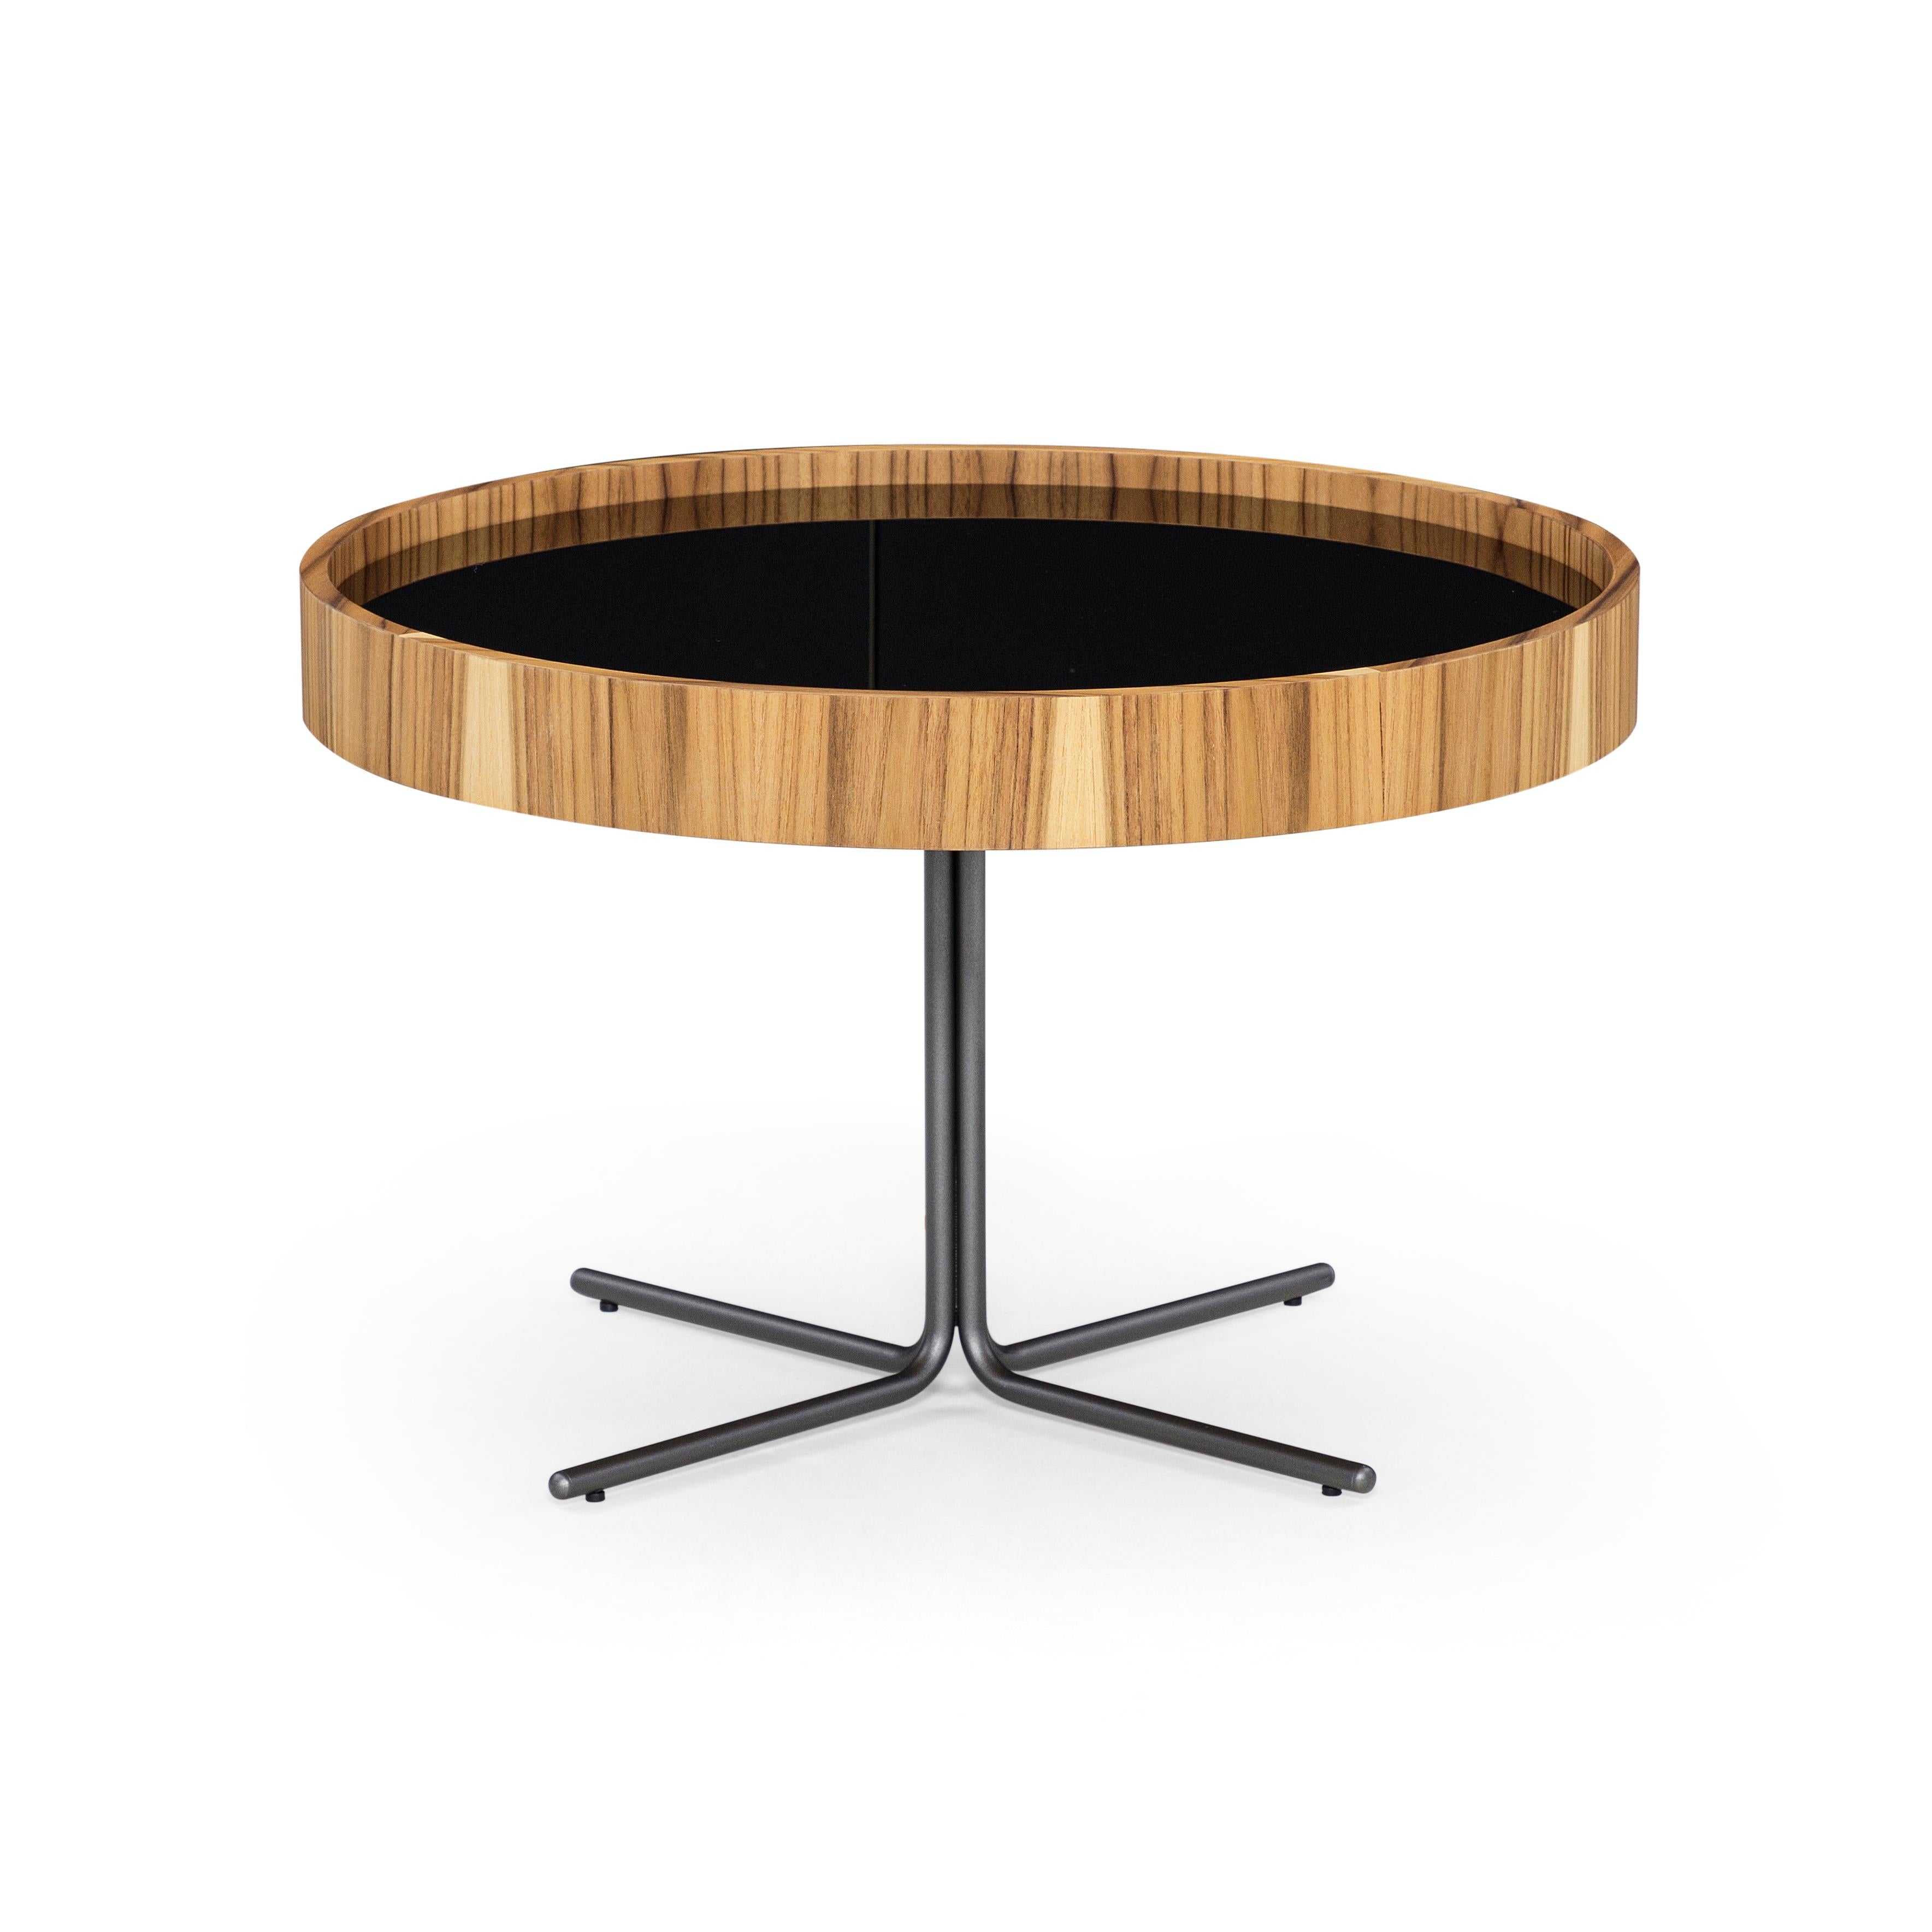 The stunning Regia occasional tables consist of a set of two tables with varying diameters and heights. The tabletop is black Nero glass. Combined with a Teak rim and stainless steel legs with a polished finish. The Regia set of tables is yet